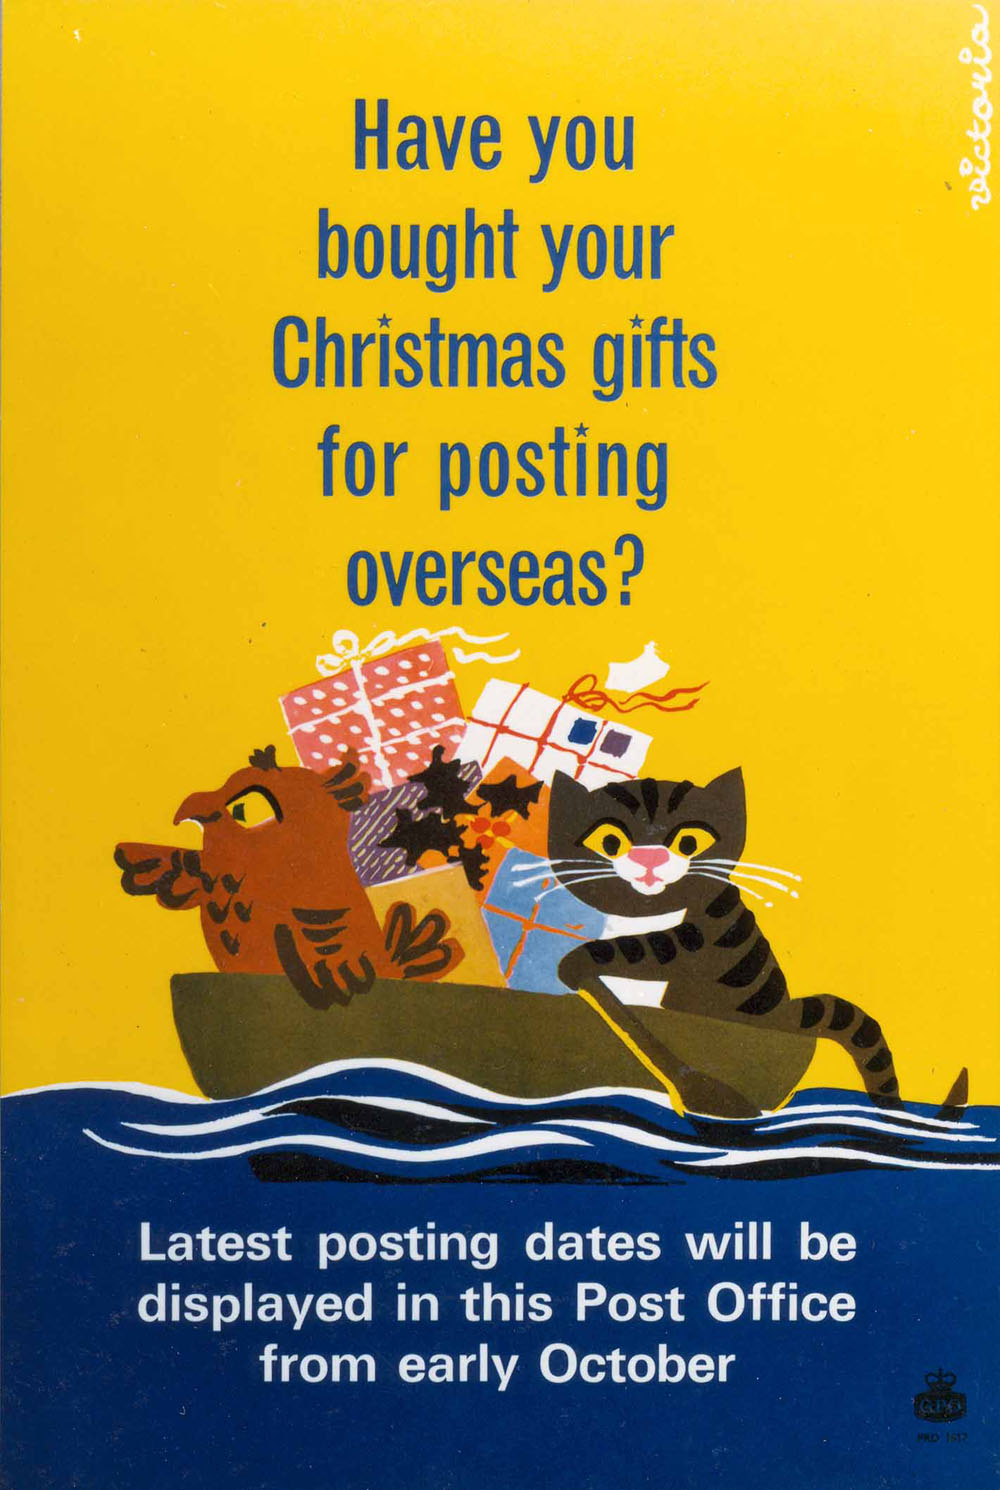 Have you bought your Christmas gifts for posting overseas? Poster by Victoria Davidson